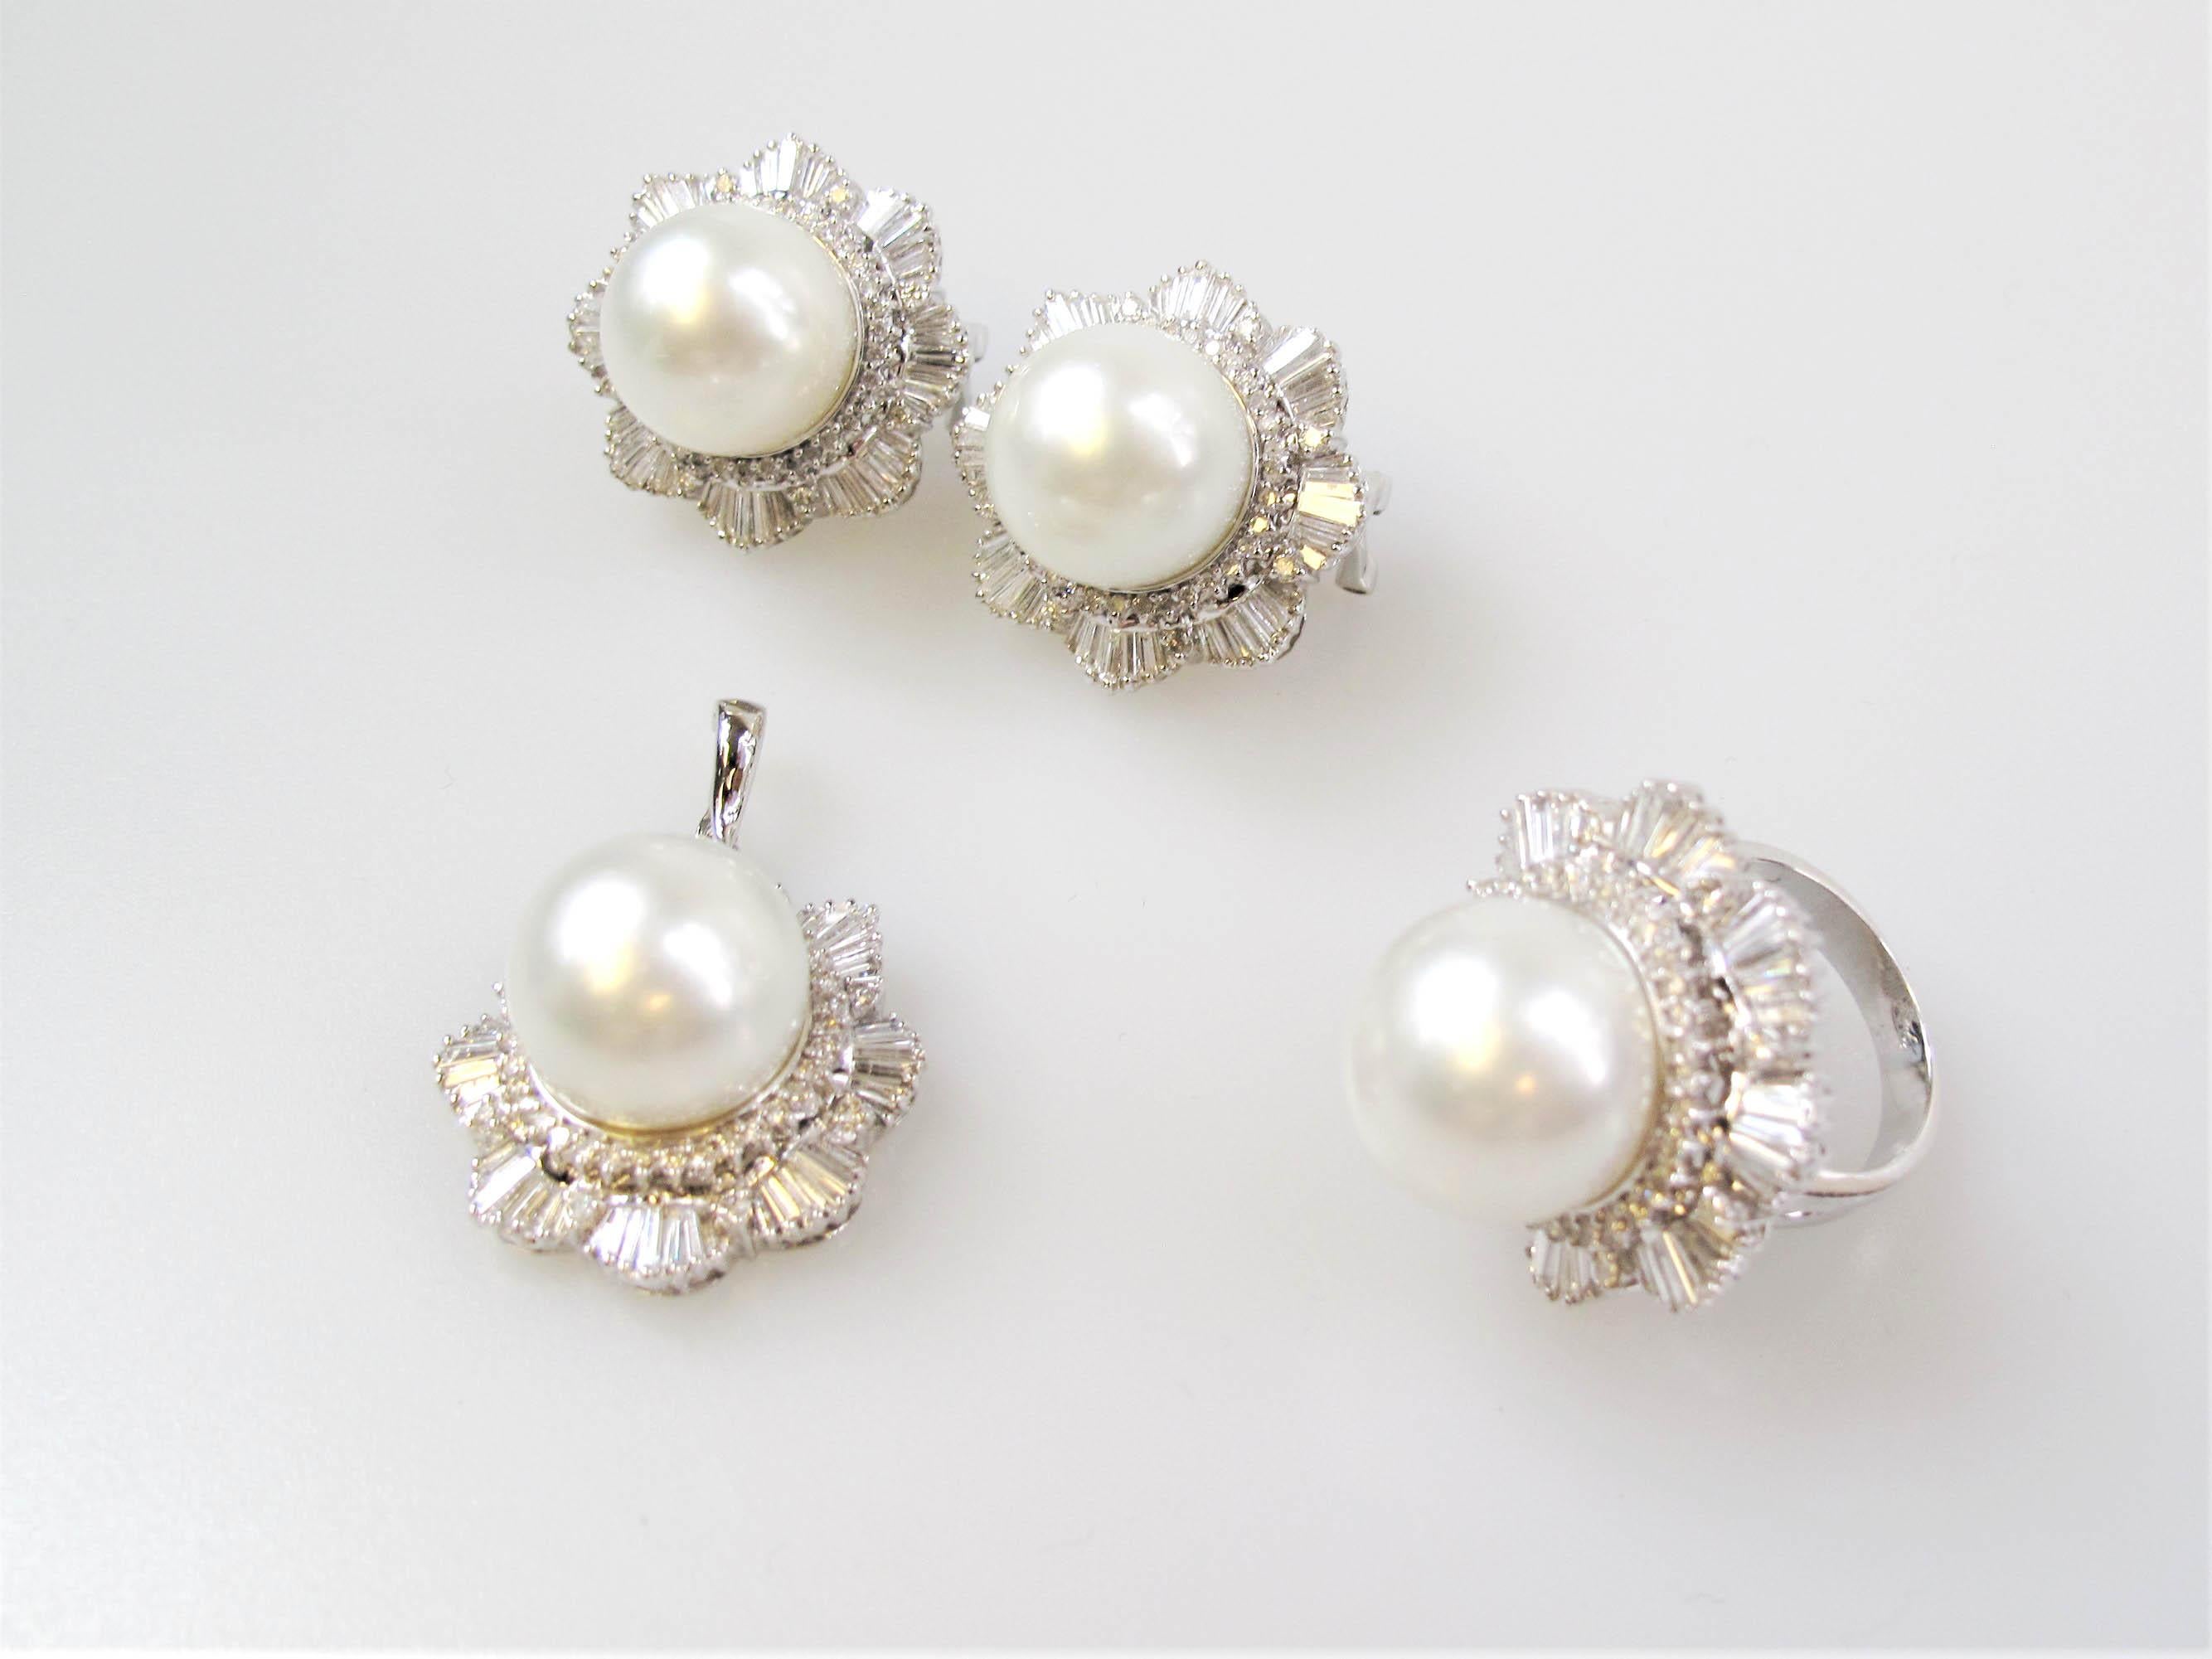 Dress up your whole look with this stunning, bold trio! This breathtaking diamond and pearl ring, earring and pendant set is made with with incredible fine details. Shimmering diamonds accent gorgeous white pearls, creating a bright and sparkling